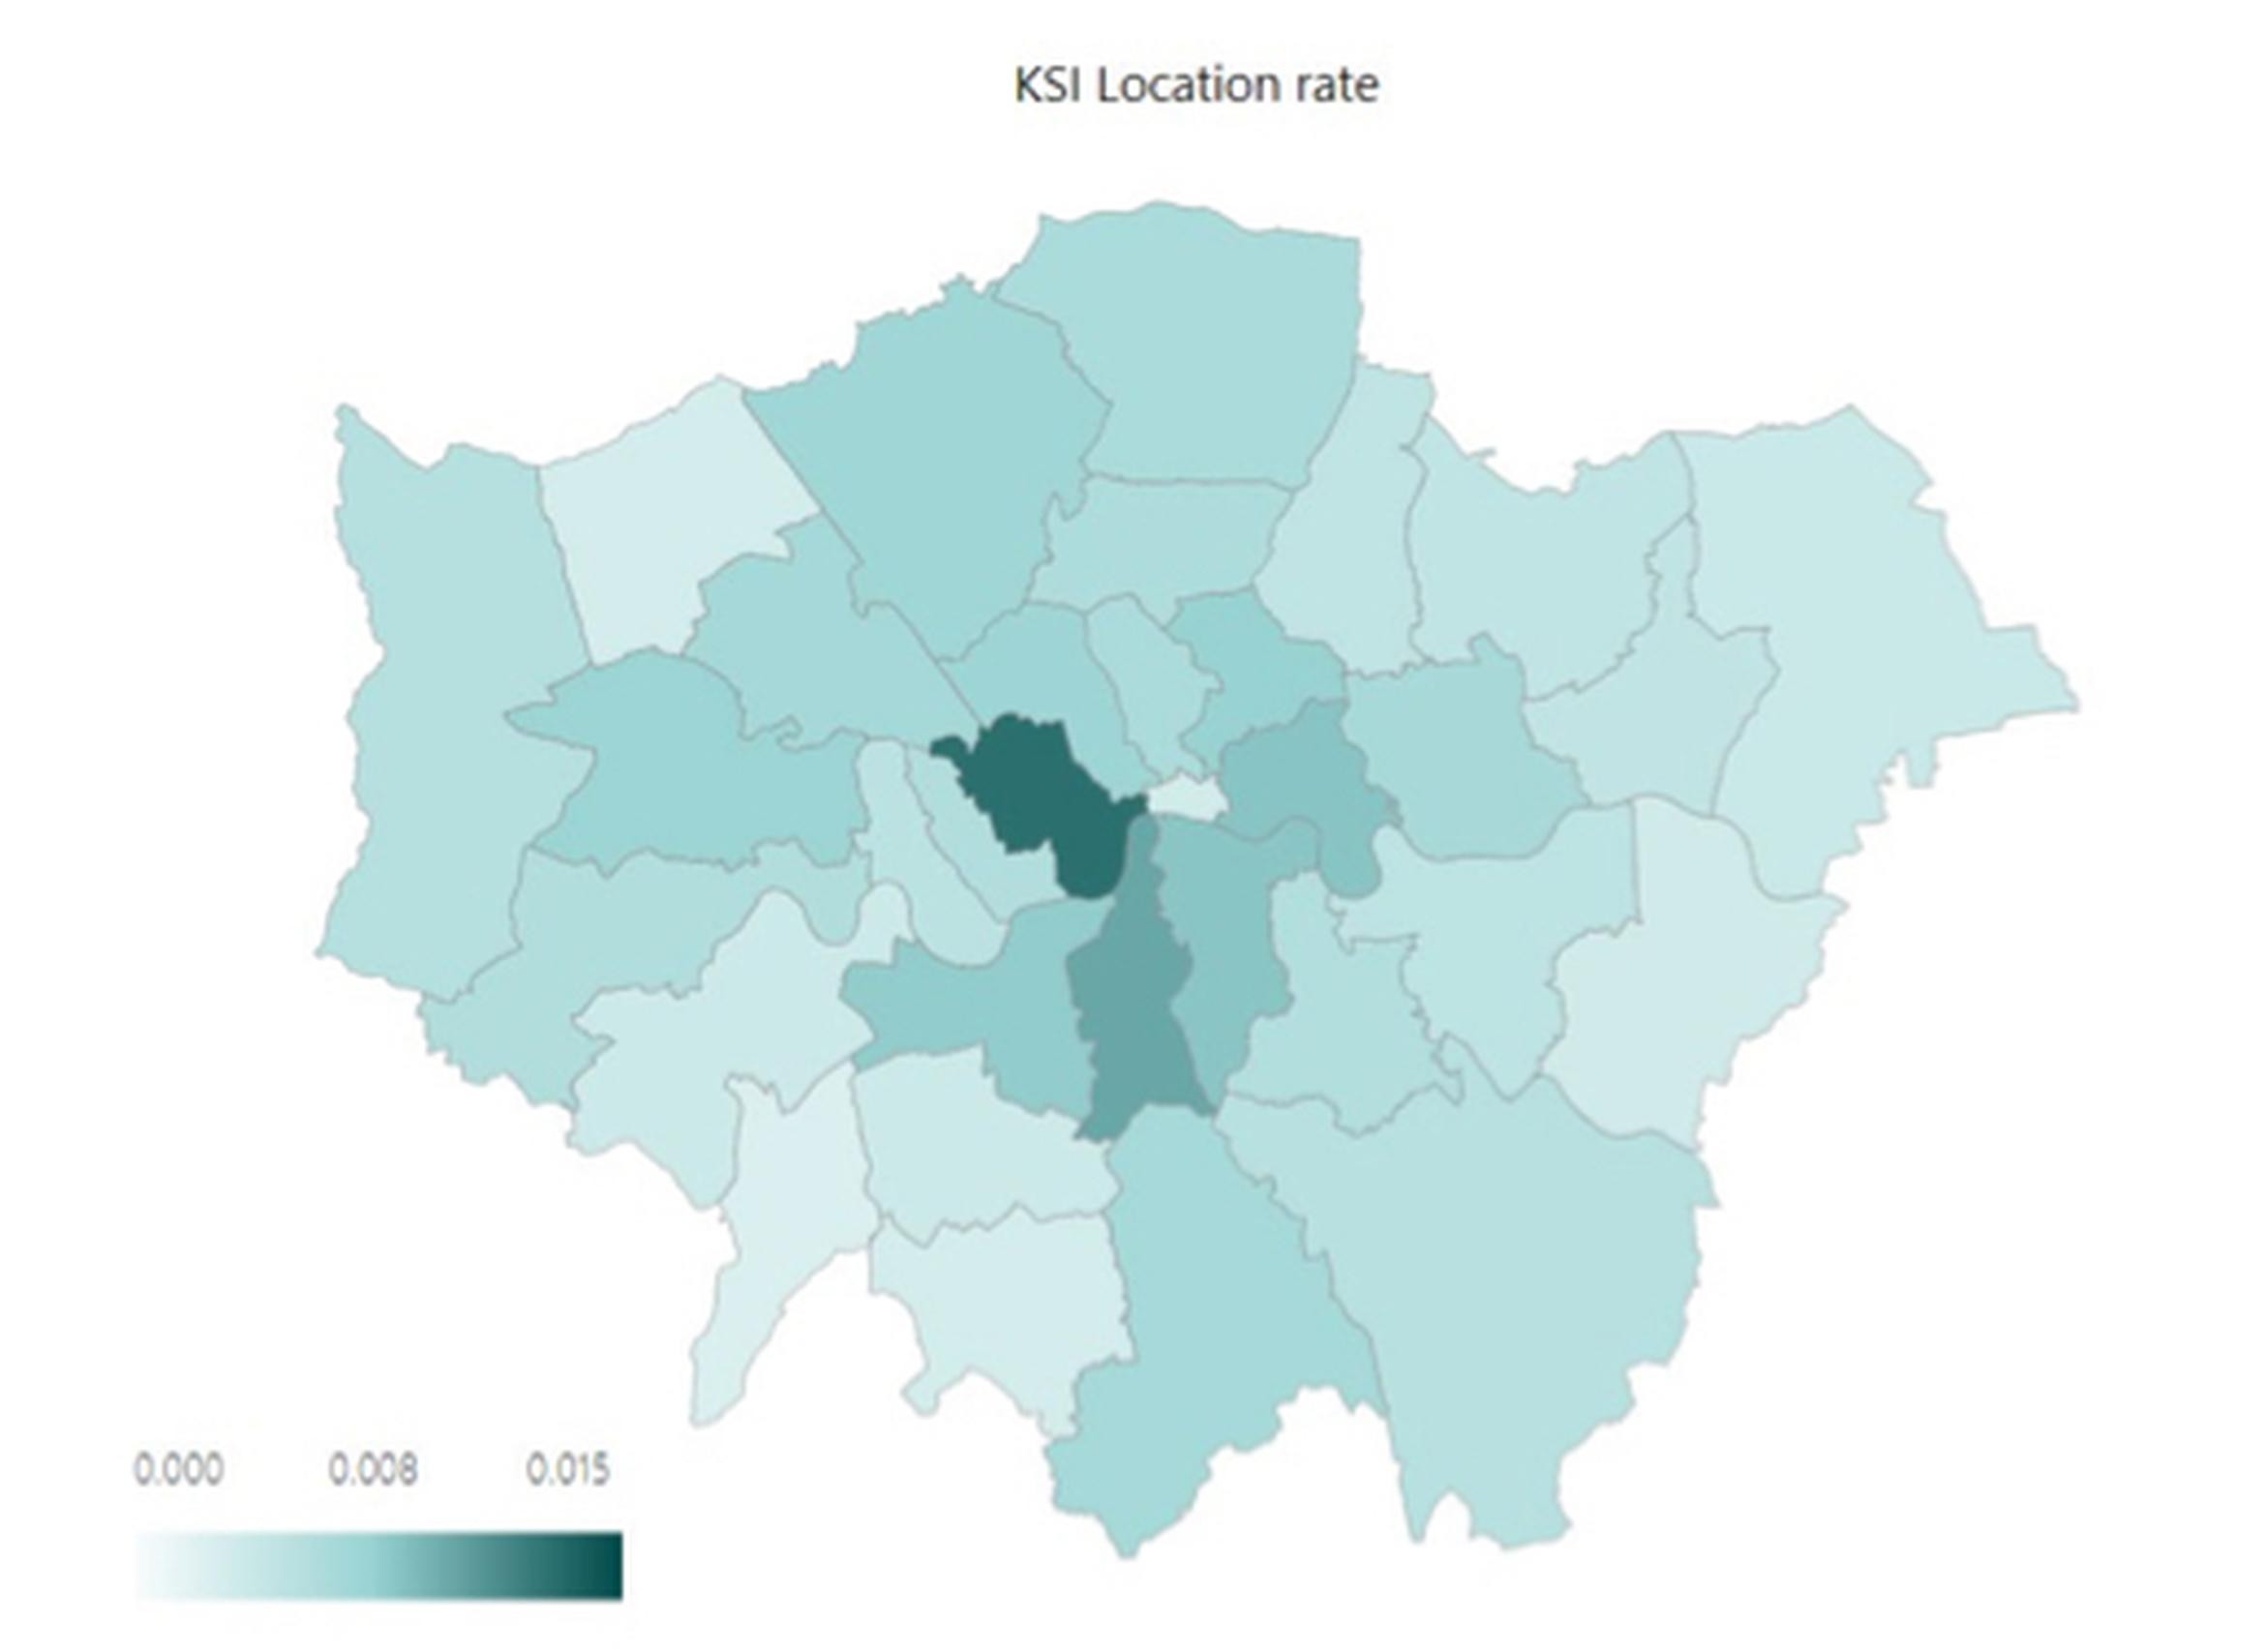 Baseline killed or seriously injured location rate (2017-19 average) by London borough